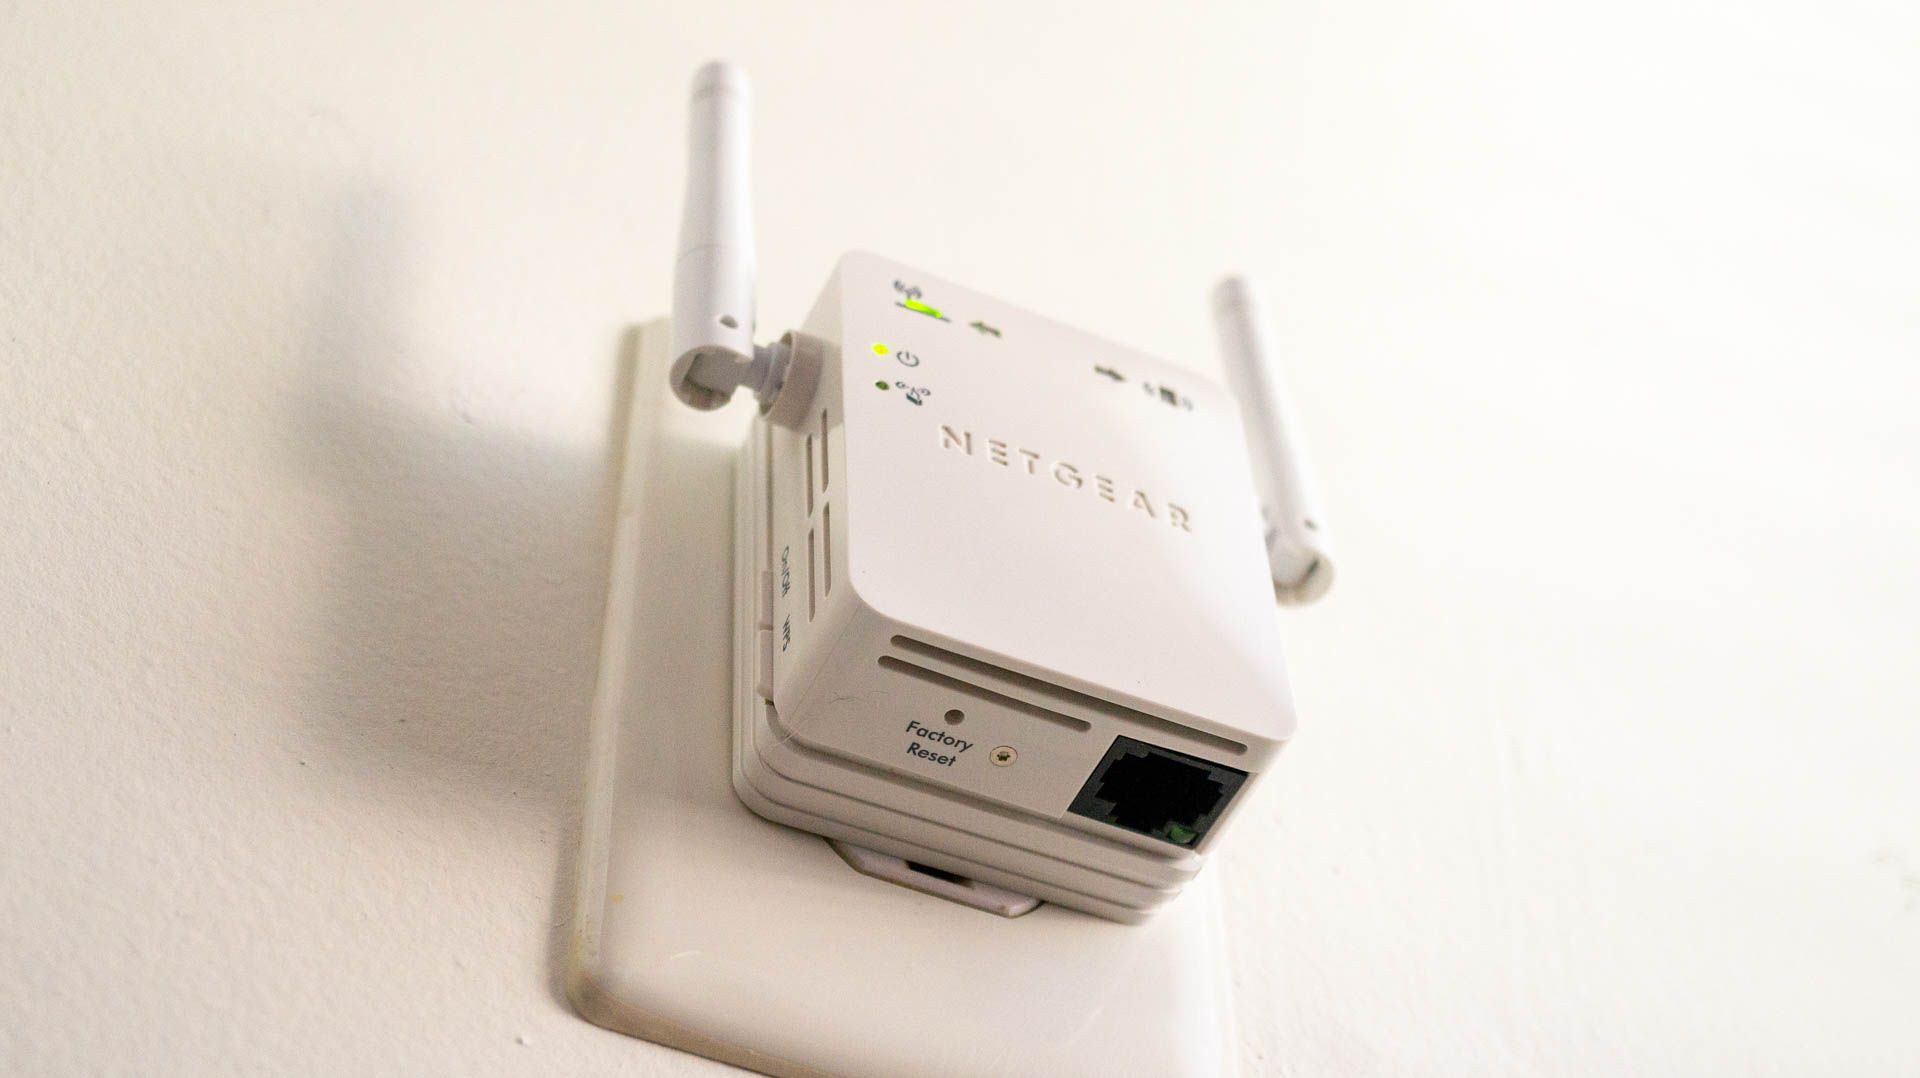 Netgear Wi-Fi extender plugged into an outlet.